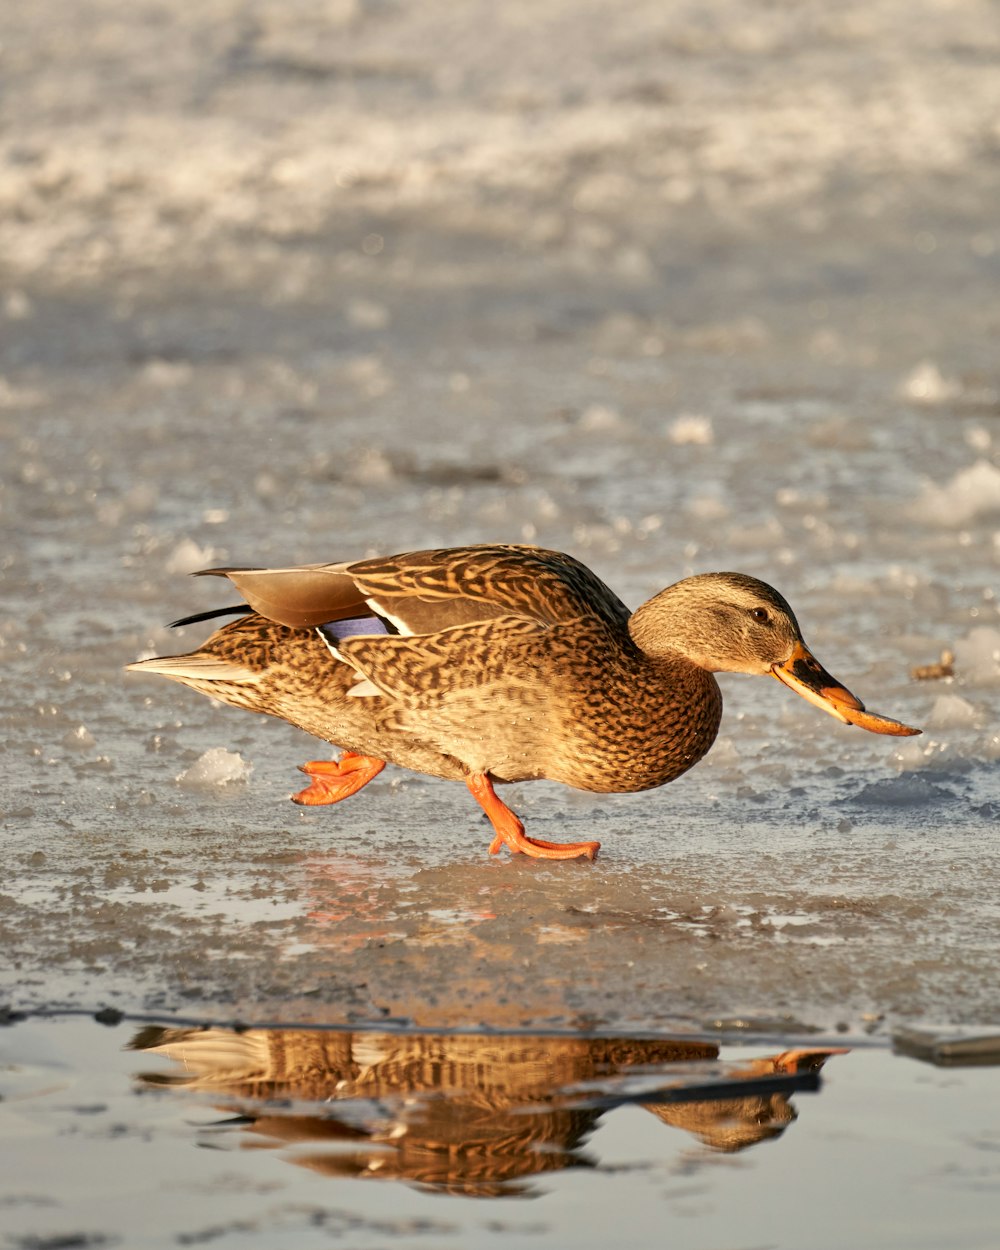 a duck is walking on the ice in the water